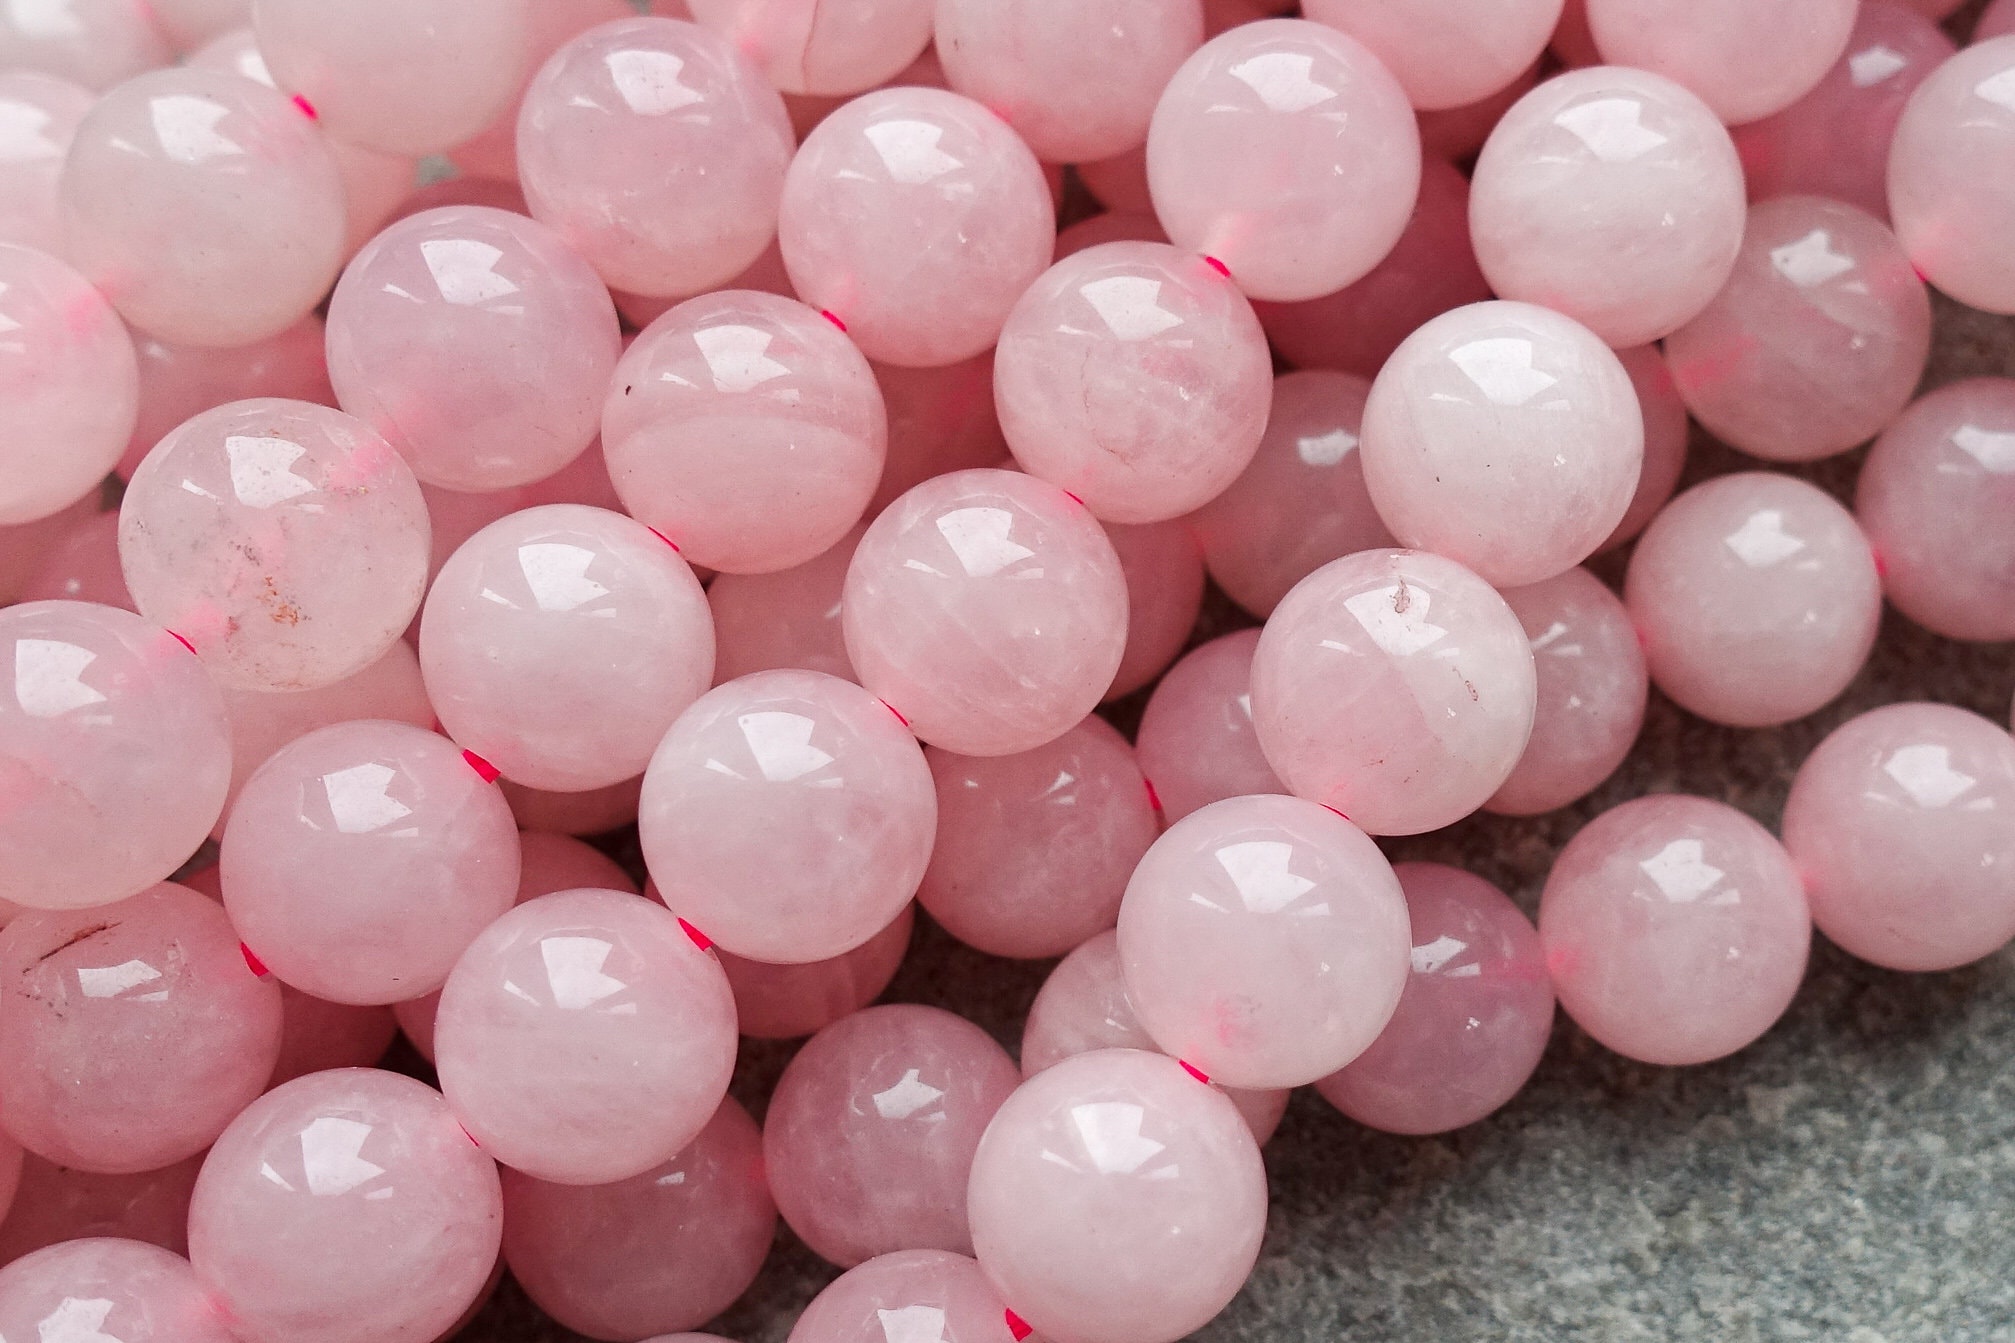 Graduated from 7x10 to 10x12 mm Rose Quartz Faceted Tie Beads Natural Gemstone Beads